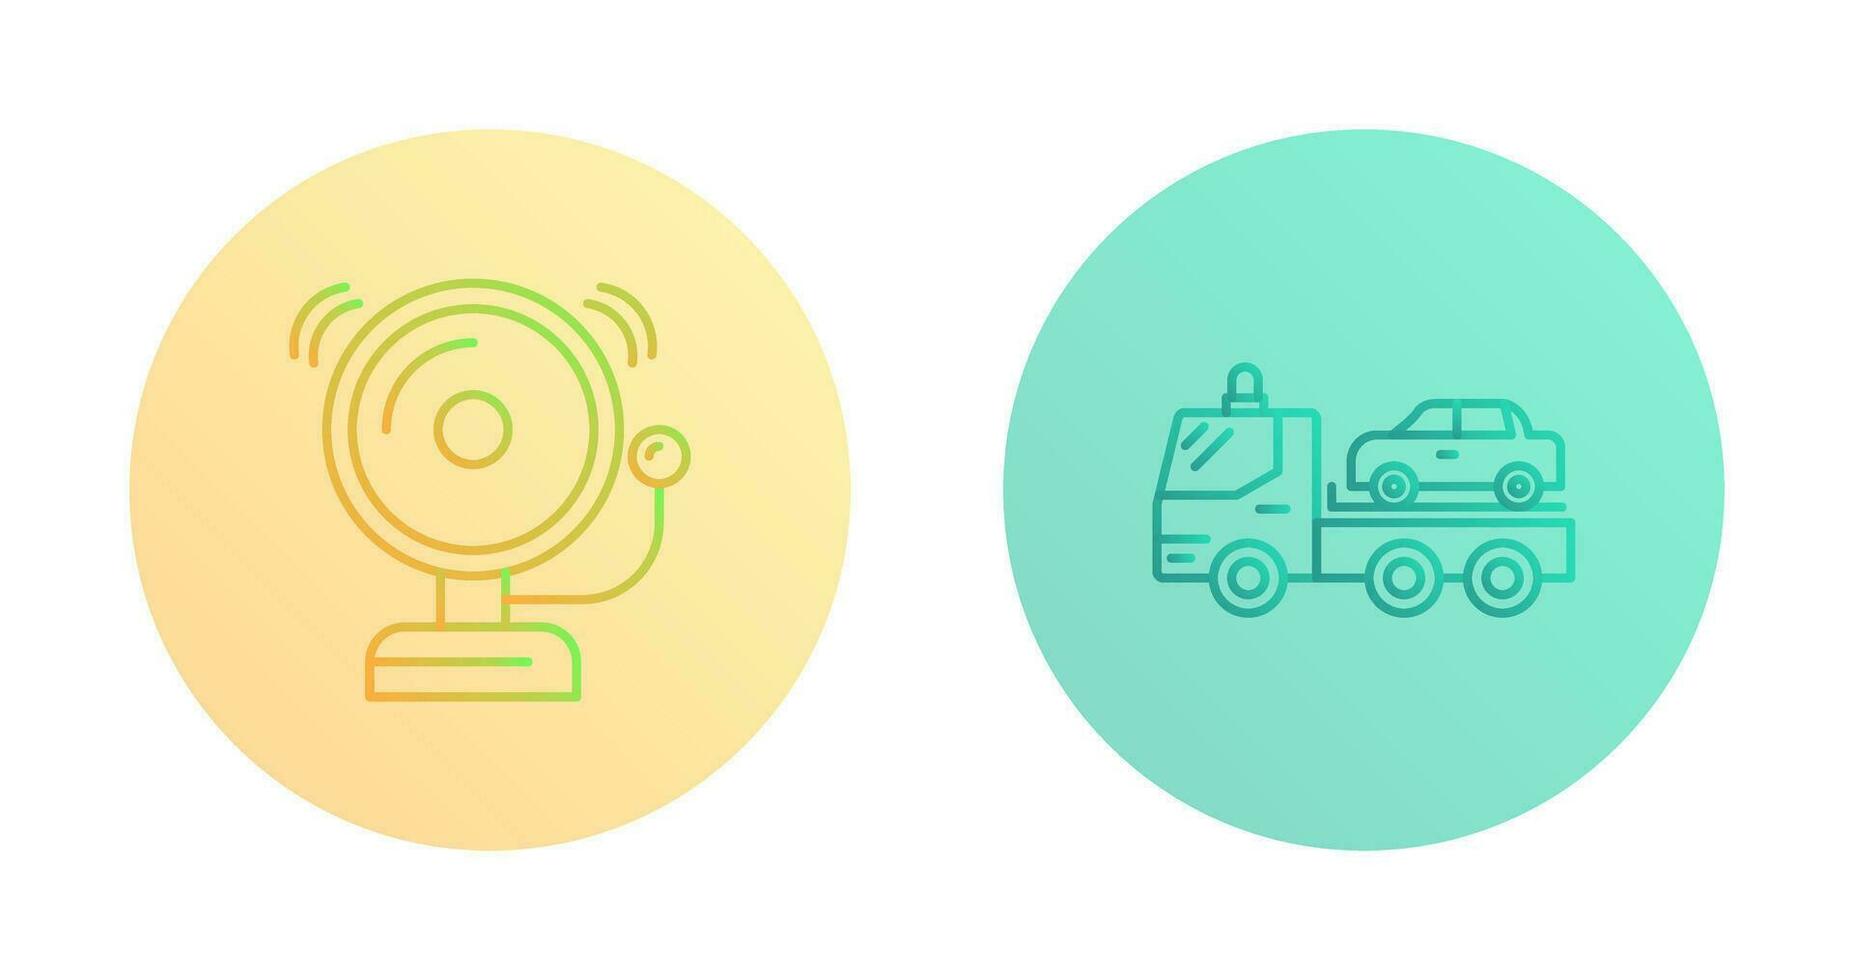 Fire Alarm and Tow Truck Icon vector